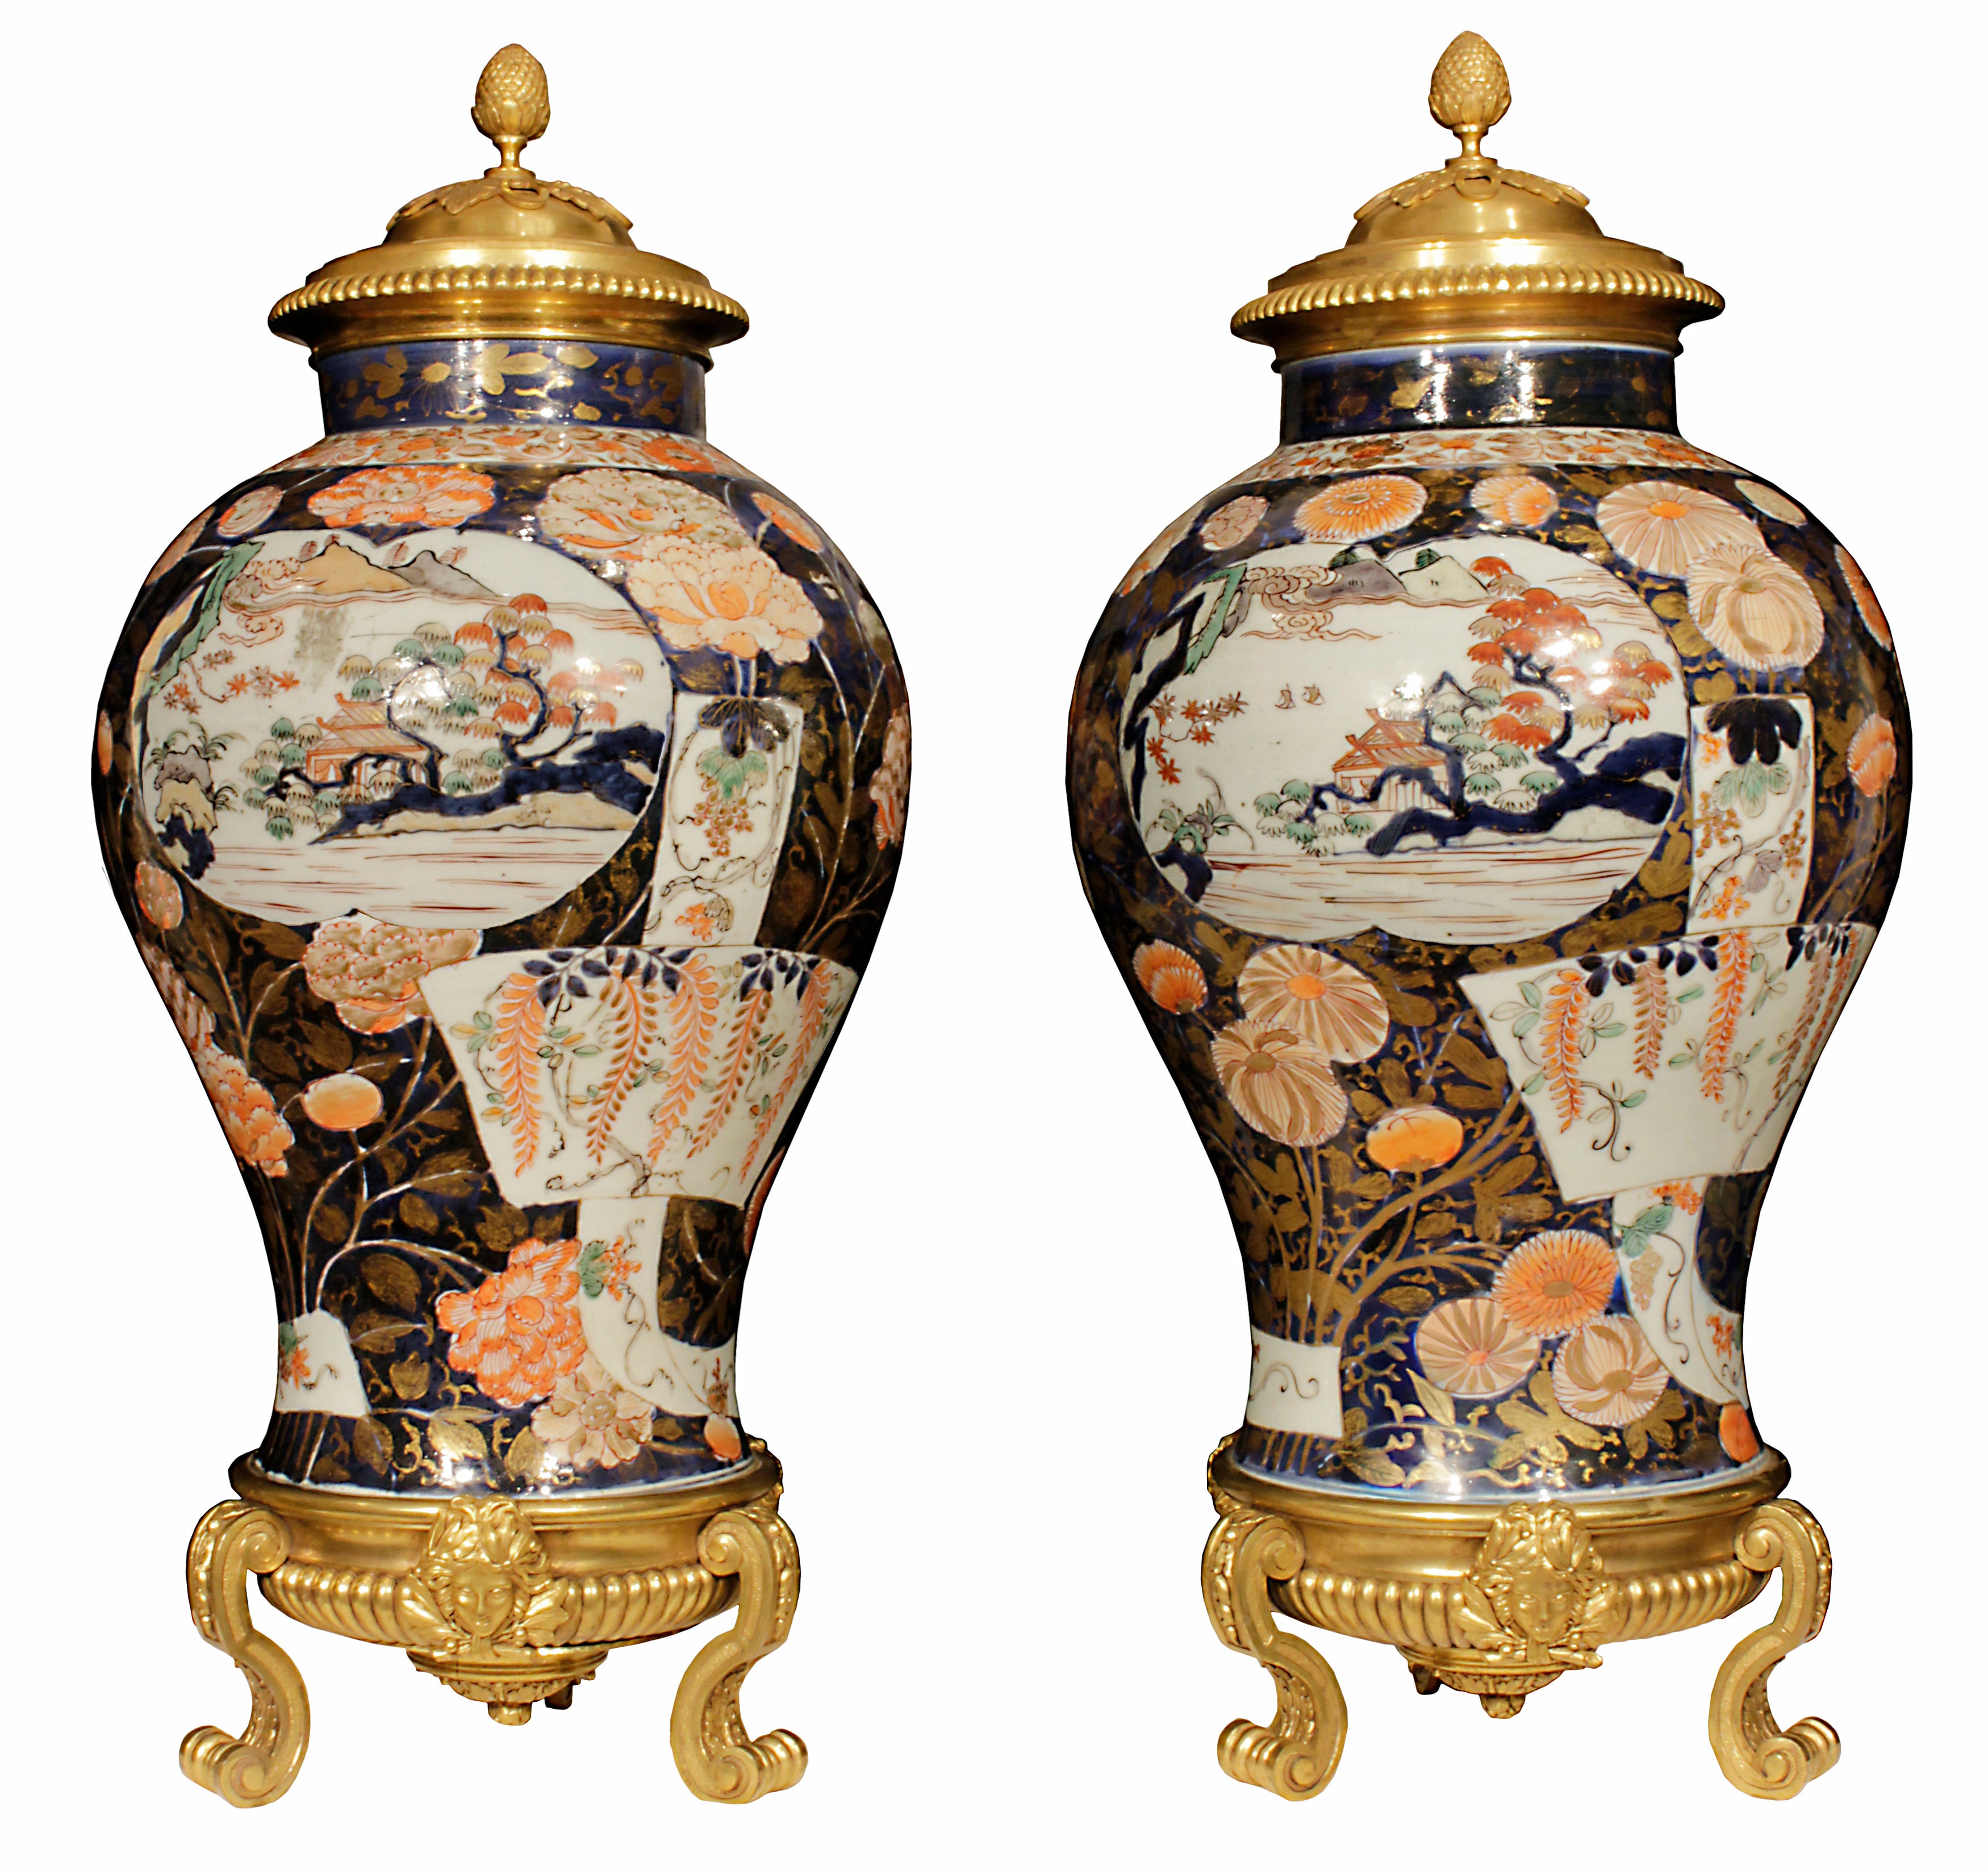 An Exceptional Pair of French 19th Century Imari Porcelain and Ormolu Lidded Urns